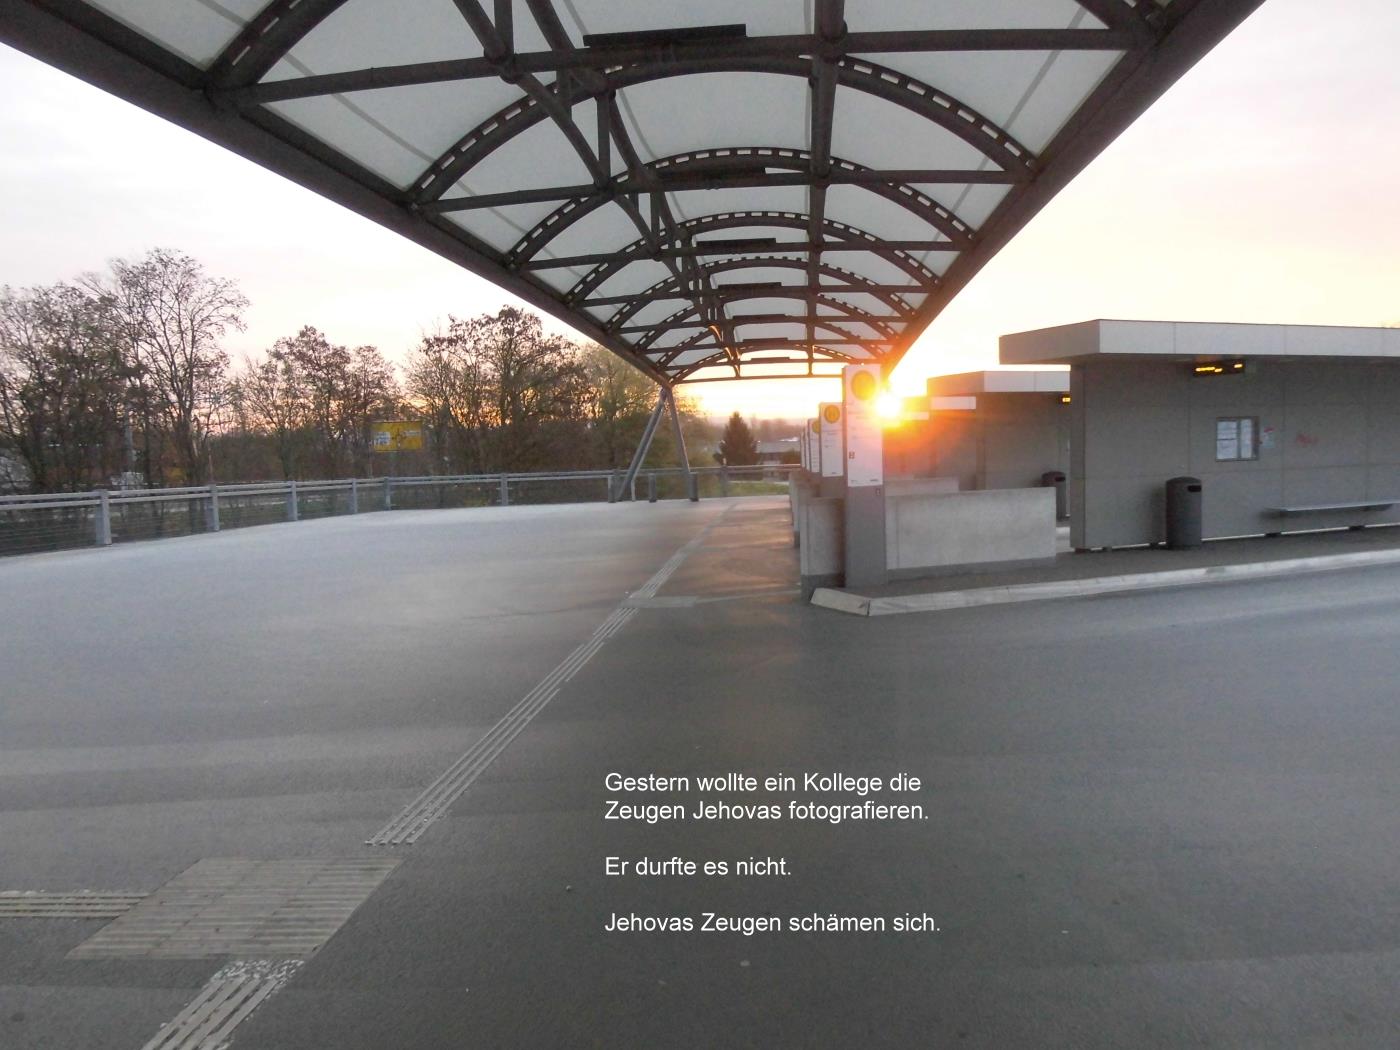 Jehovah's Witnesses like to stand at Walldorf-Wiesloch station